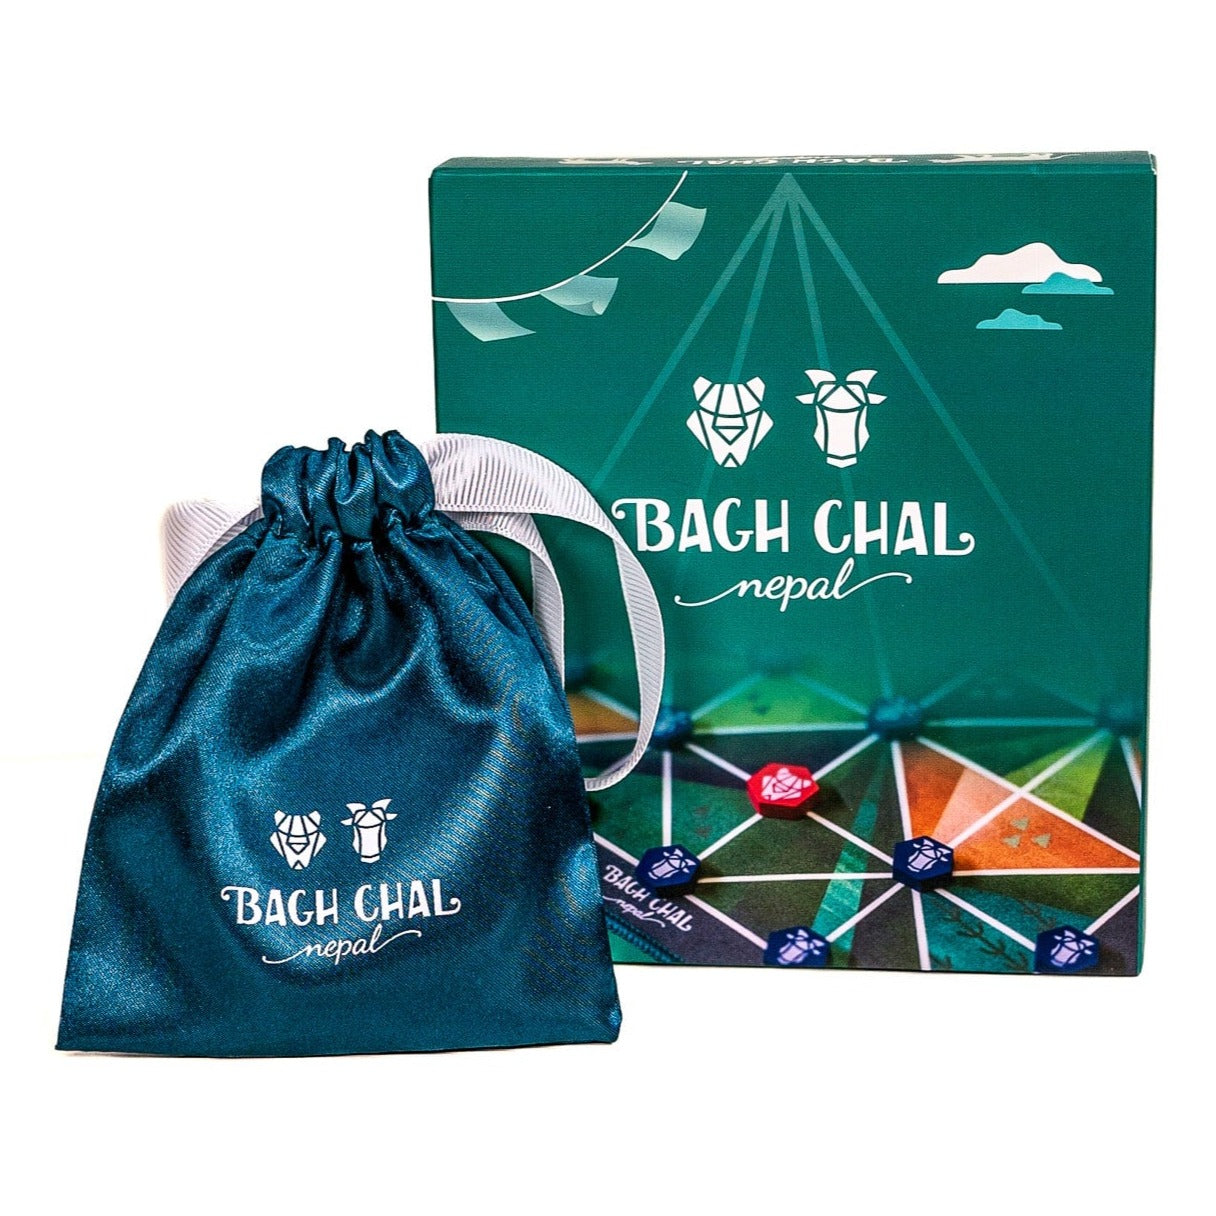 Bagh Chal box - Deluxe edition. 2-player abstract strategy game from Nepal that fits into your pocket.